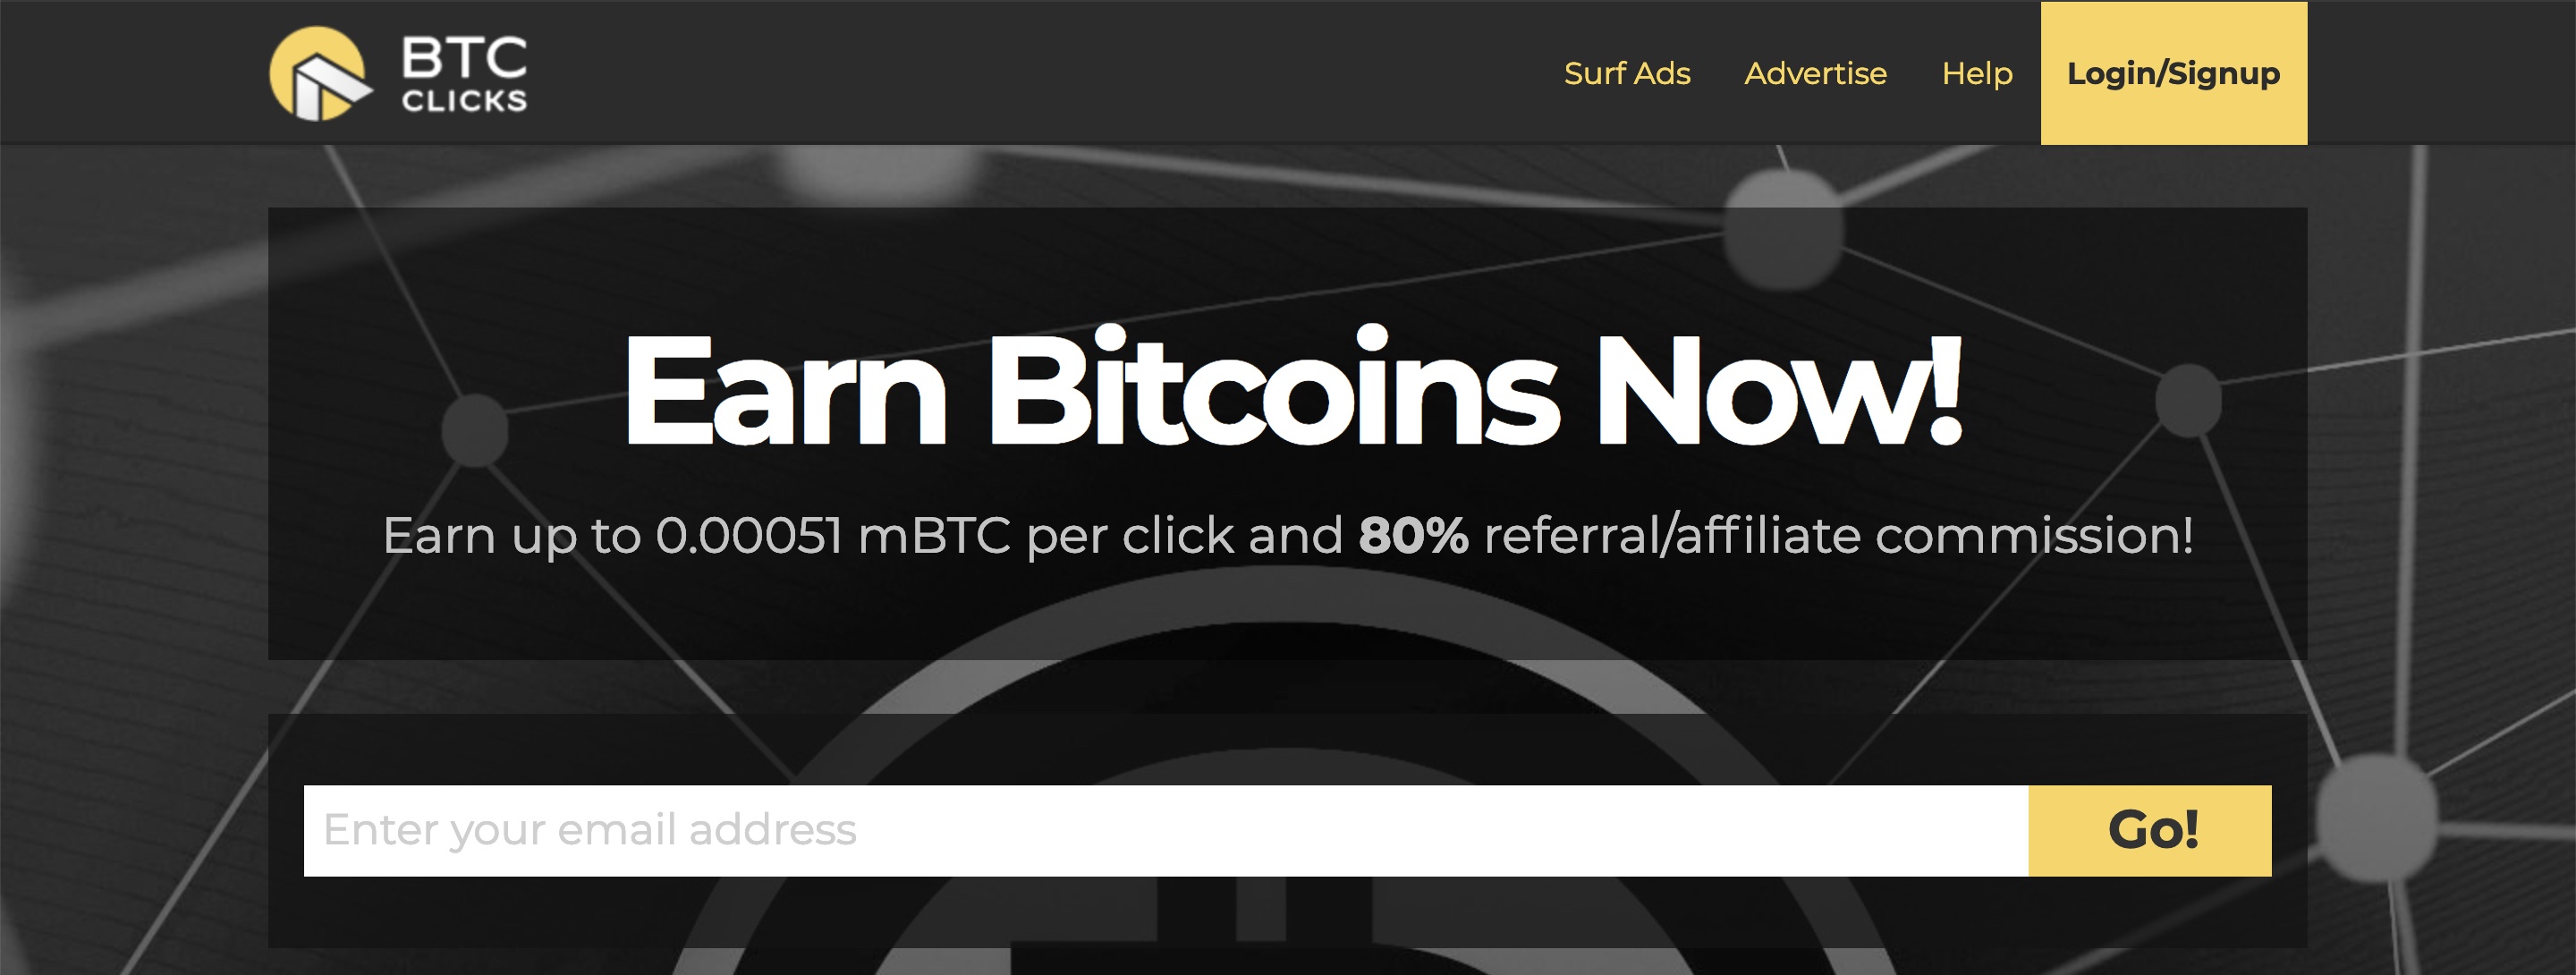 Btc Clicks Review Earn Bitcoin By Clicking On Ads - 